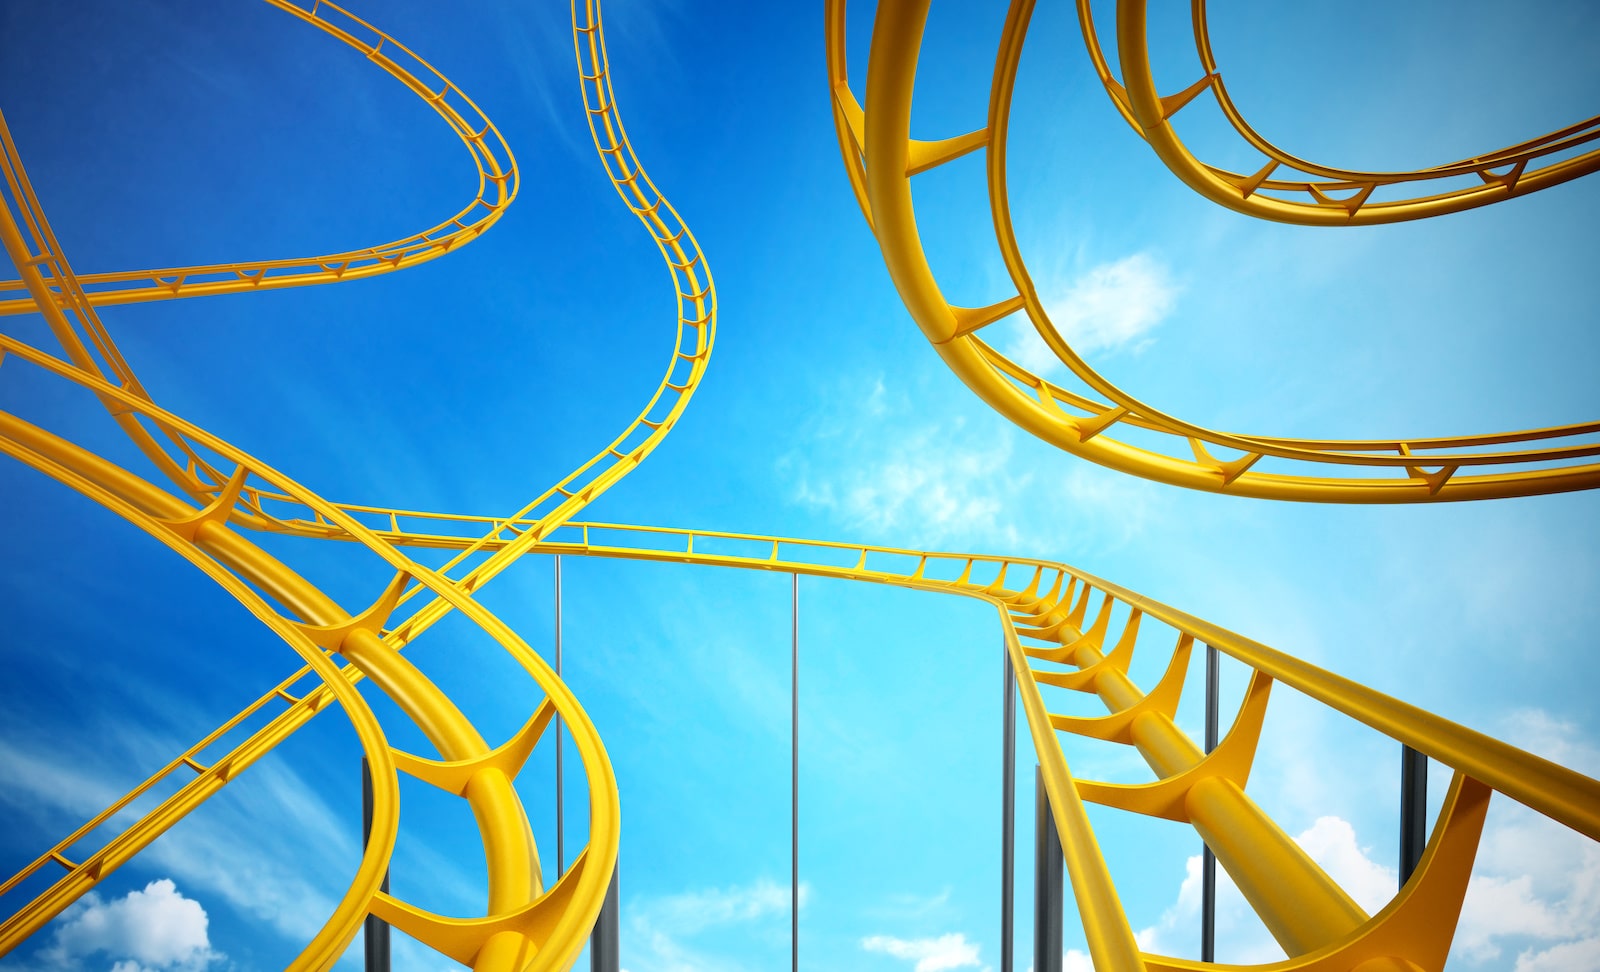 Yellow rollercoaster with blue sky in background